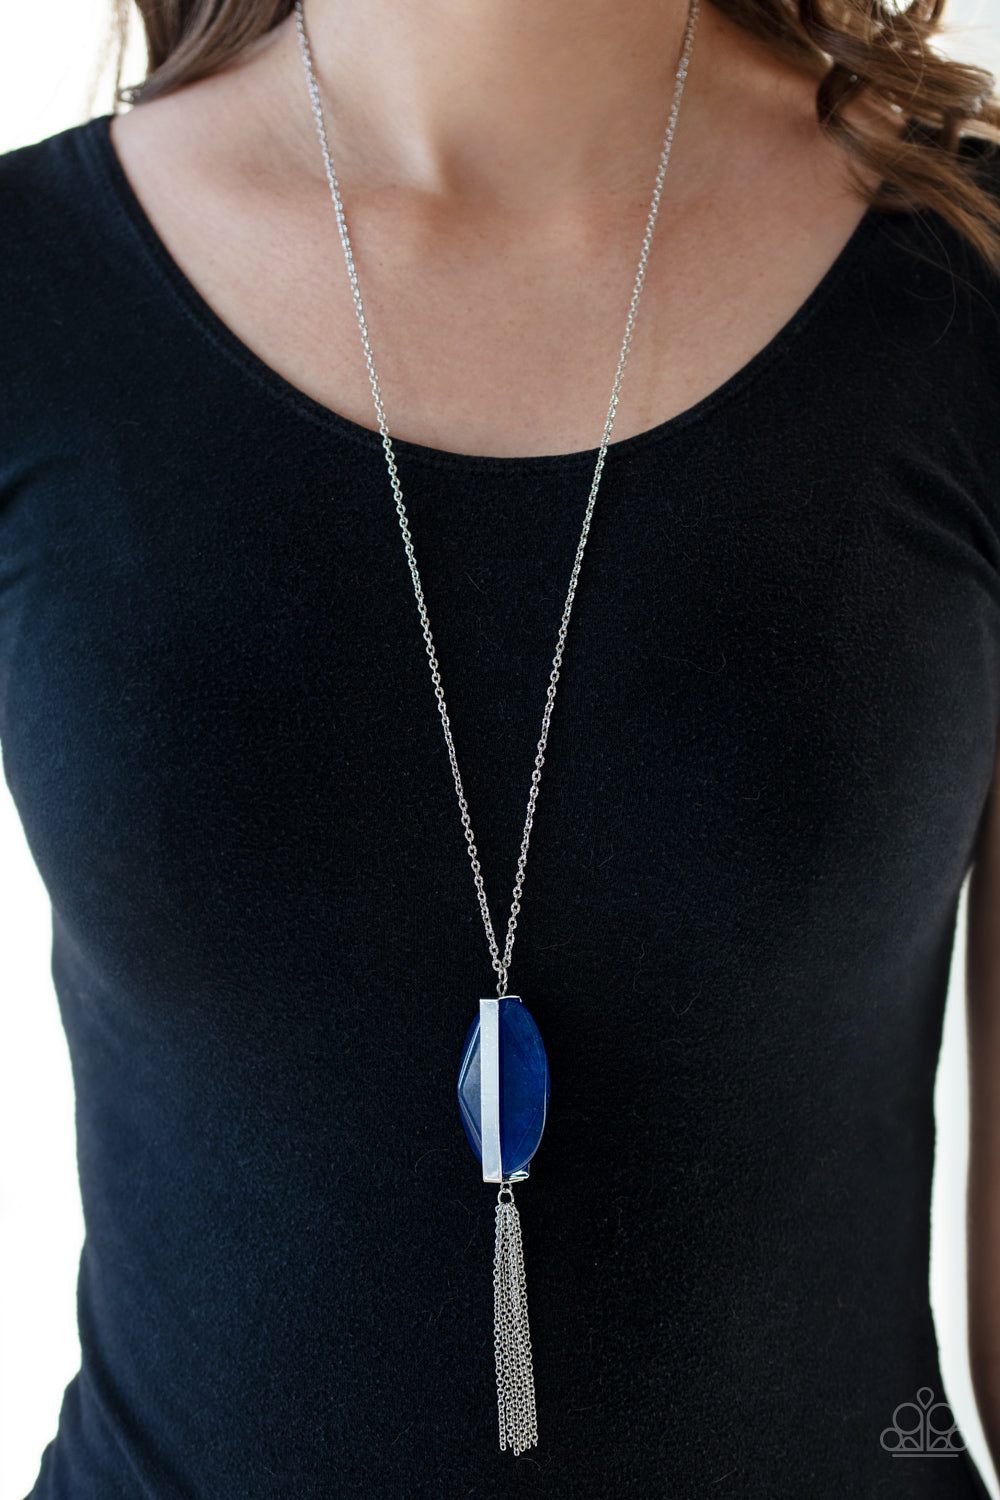 Paparazzi Jewelry & Accessories - Tranquility Trend - Blue Necklace. Bling By Titia Boutique